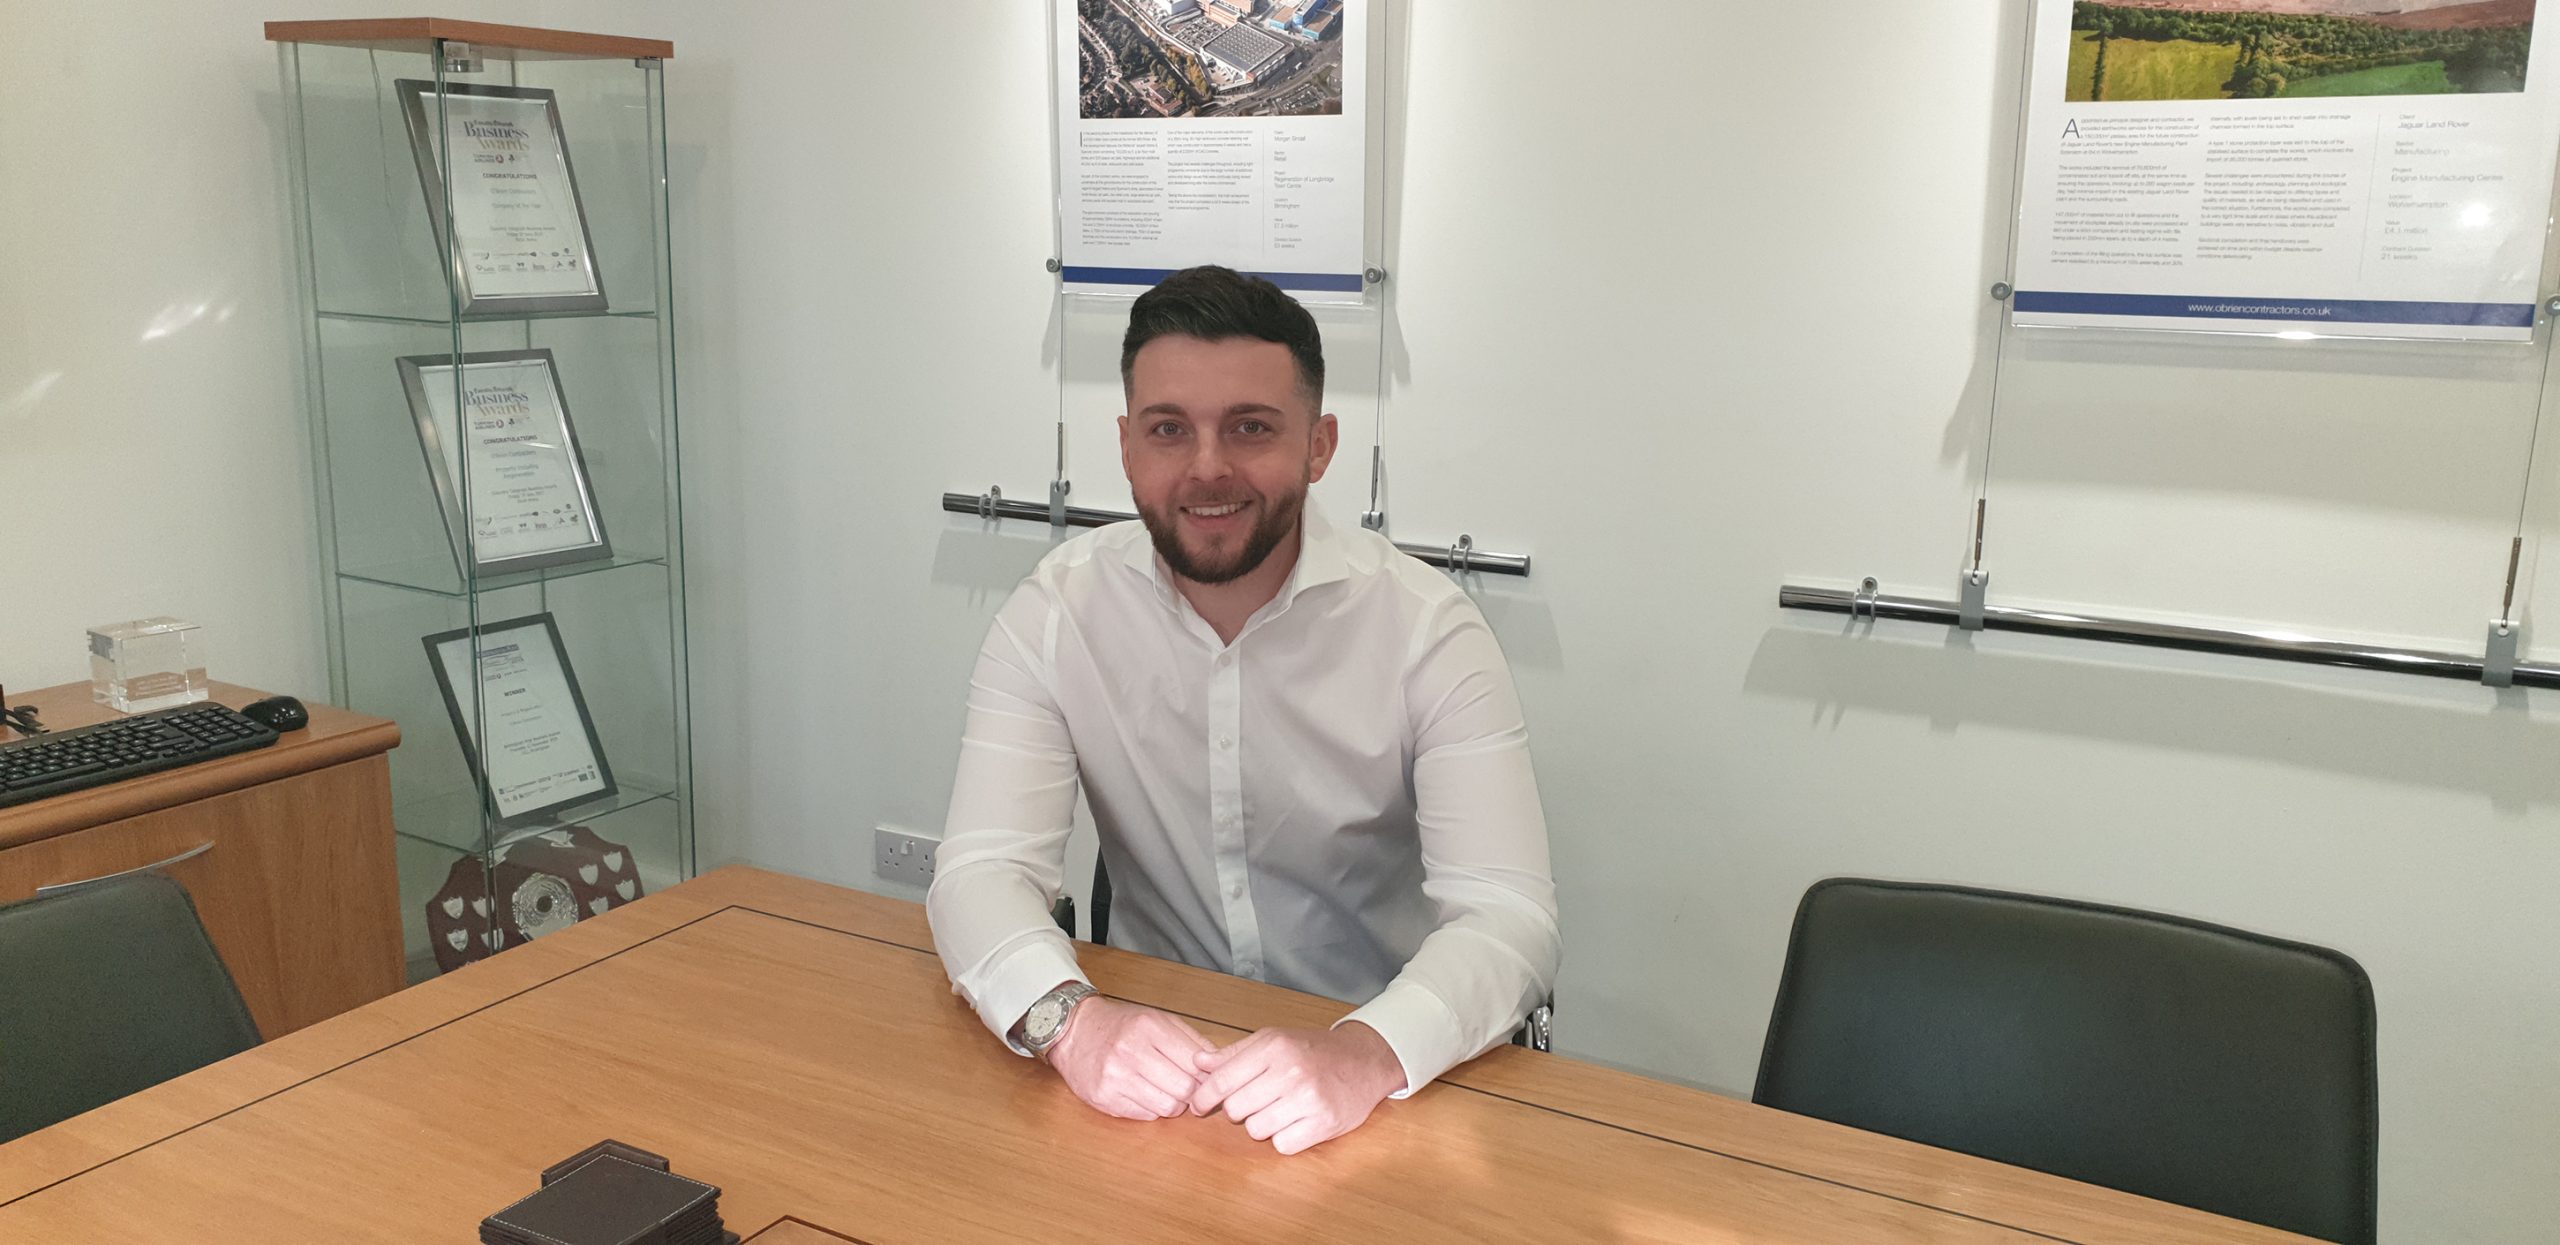 Tom’s Journey to Qualify as an Accountant – Well Done Tom Daly!